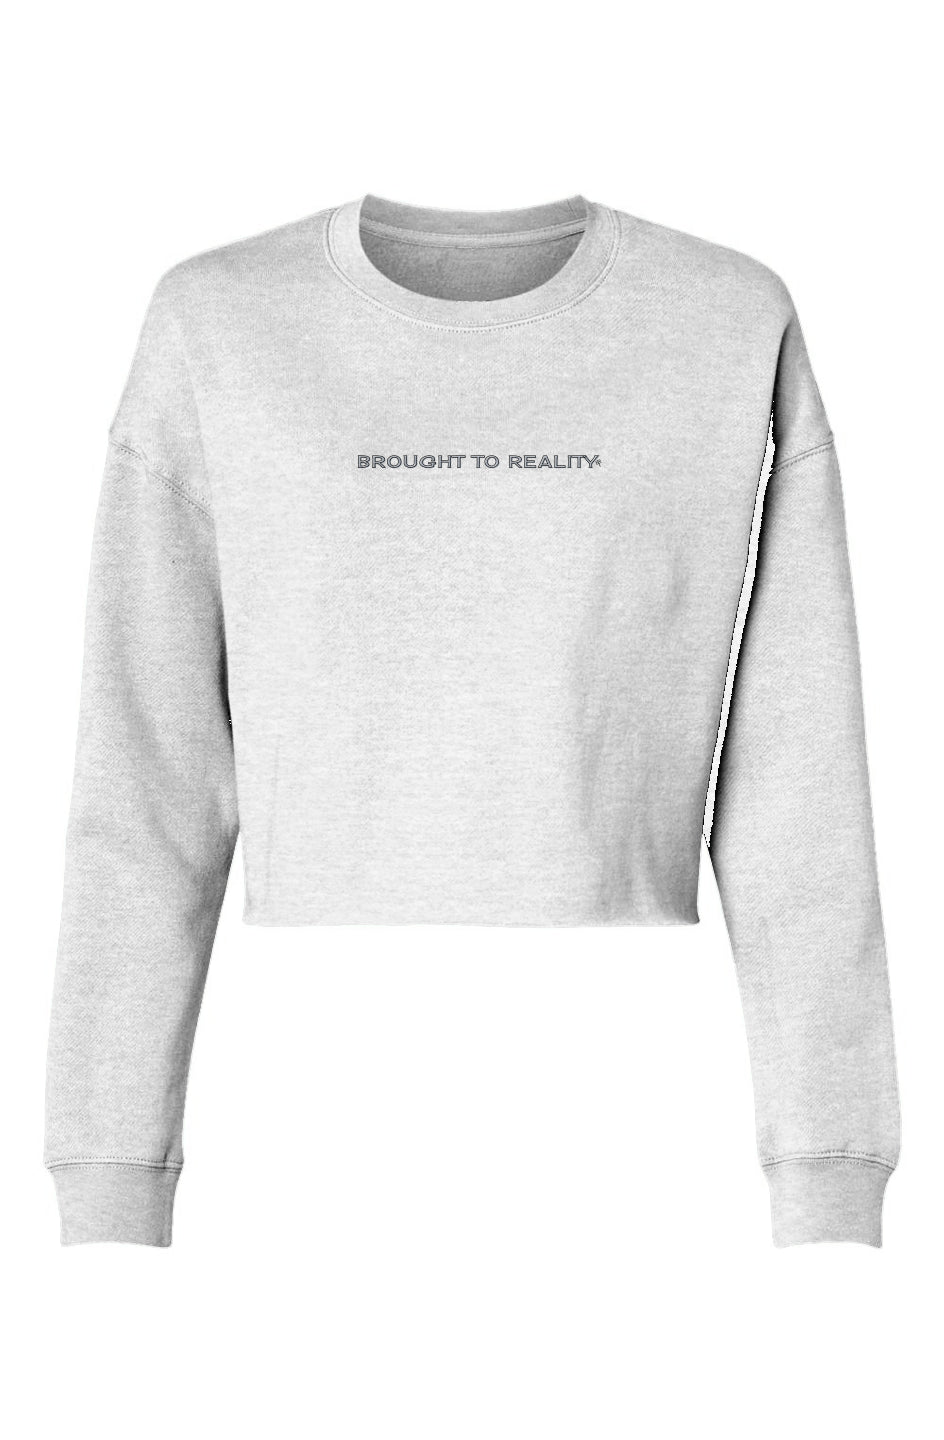 Lightweight Cropped Crew Brought to Reality sweatshirt - Brought To Reality